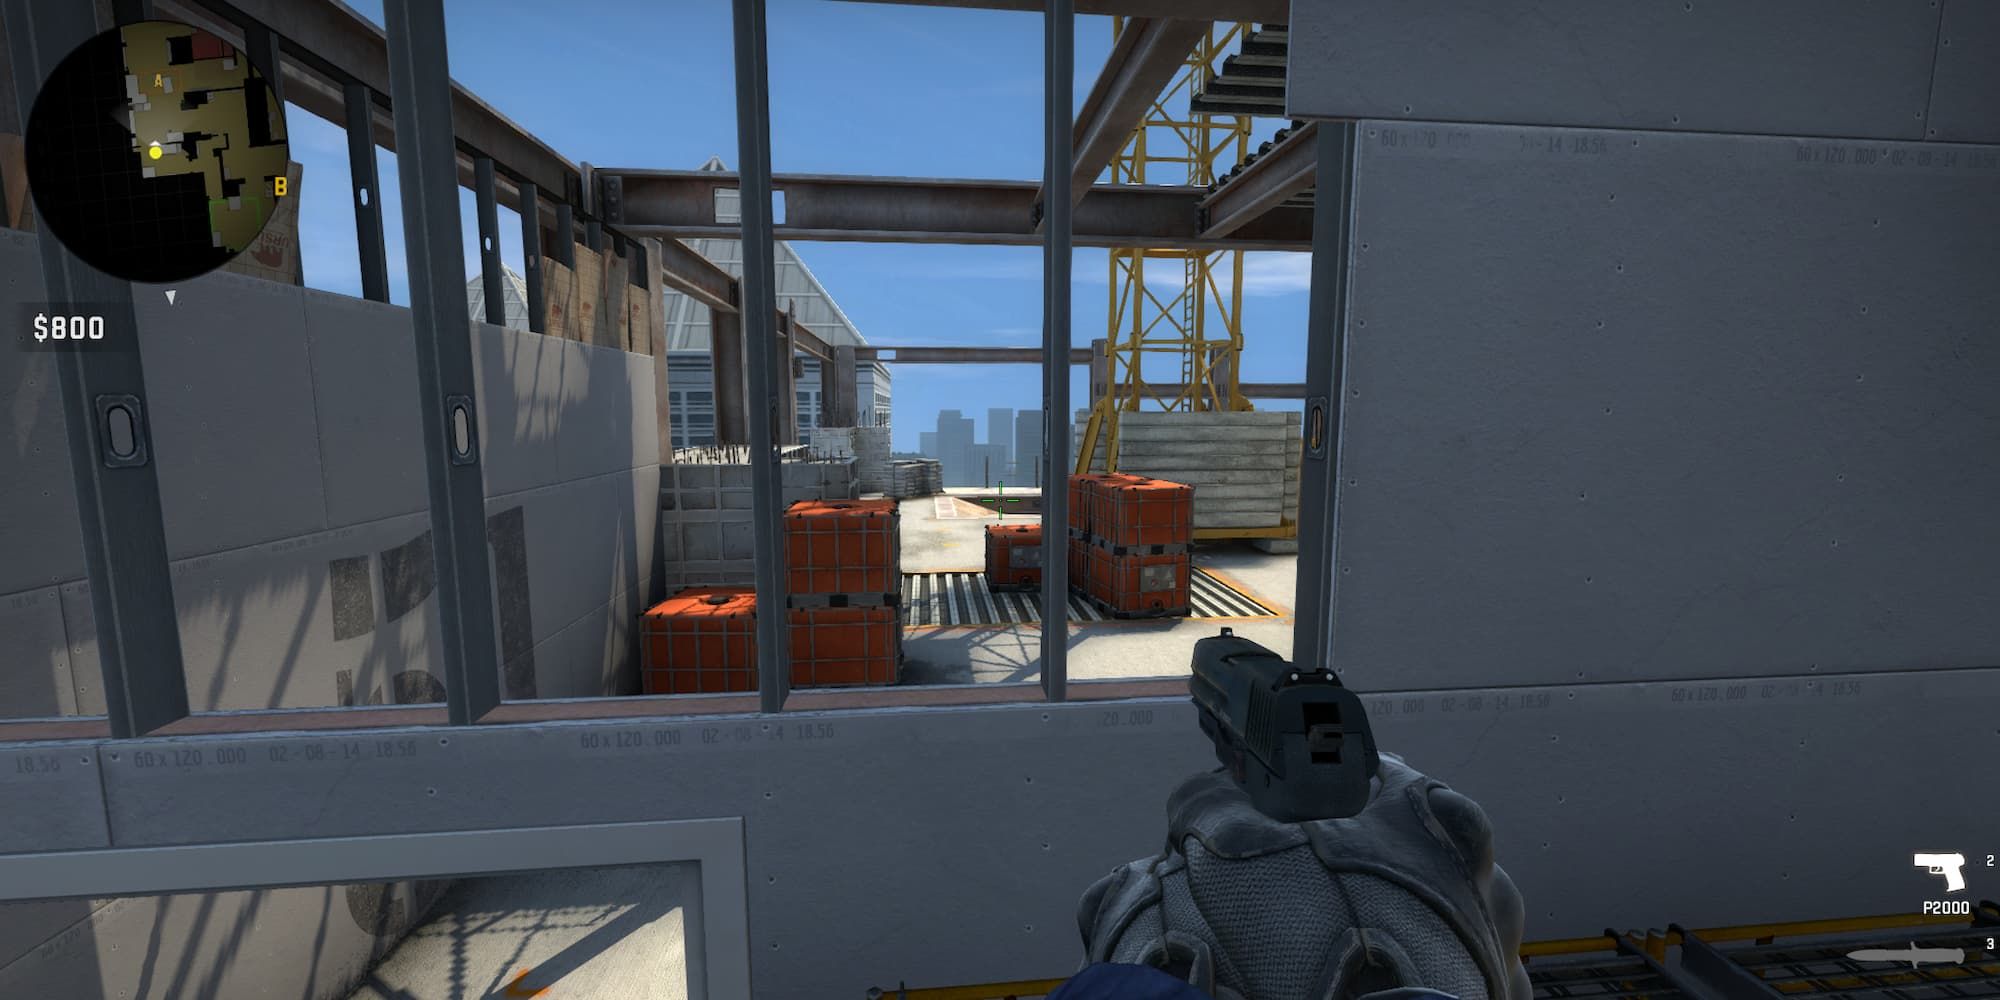 At Back of A on Vertigo, a player stands on the scaffolding to look through an unfinished wall.